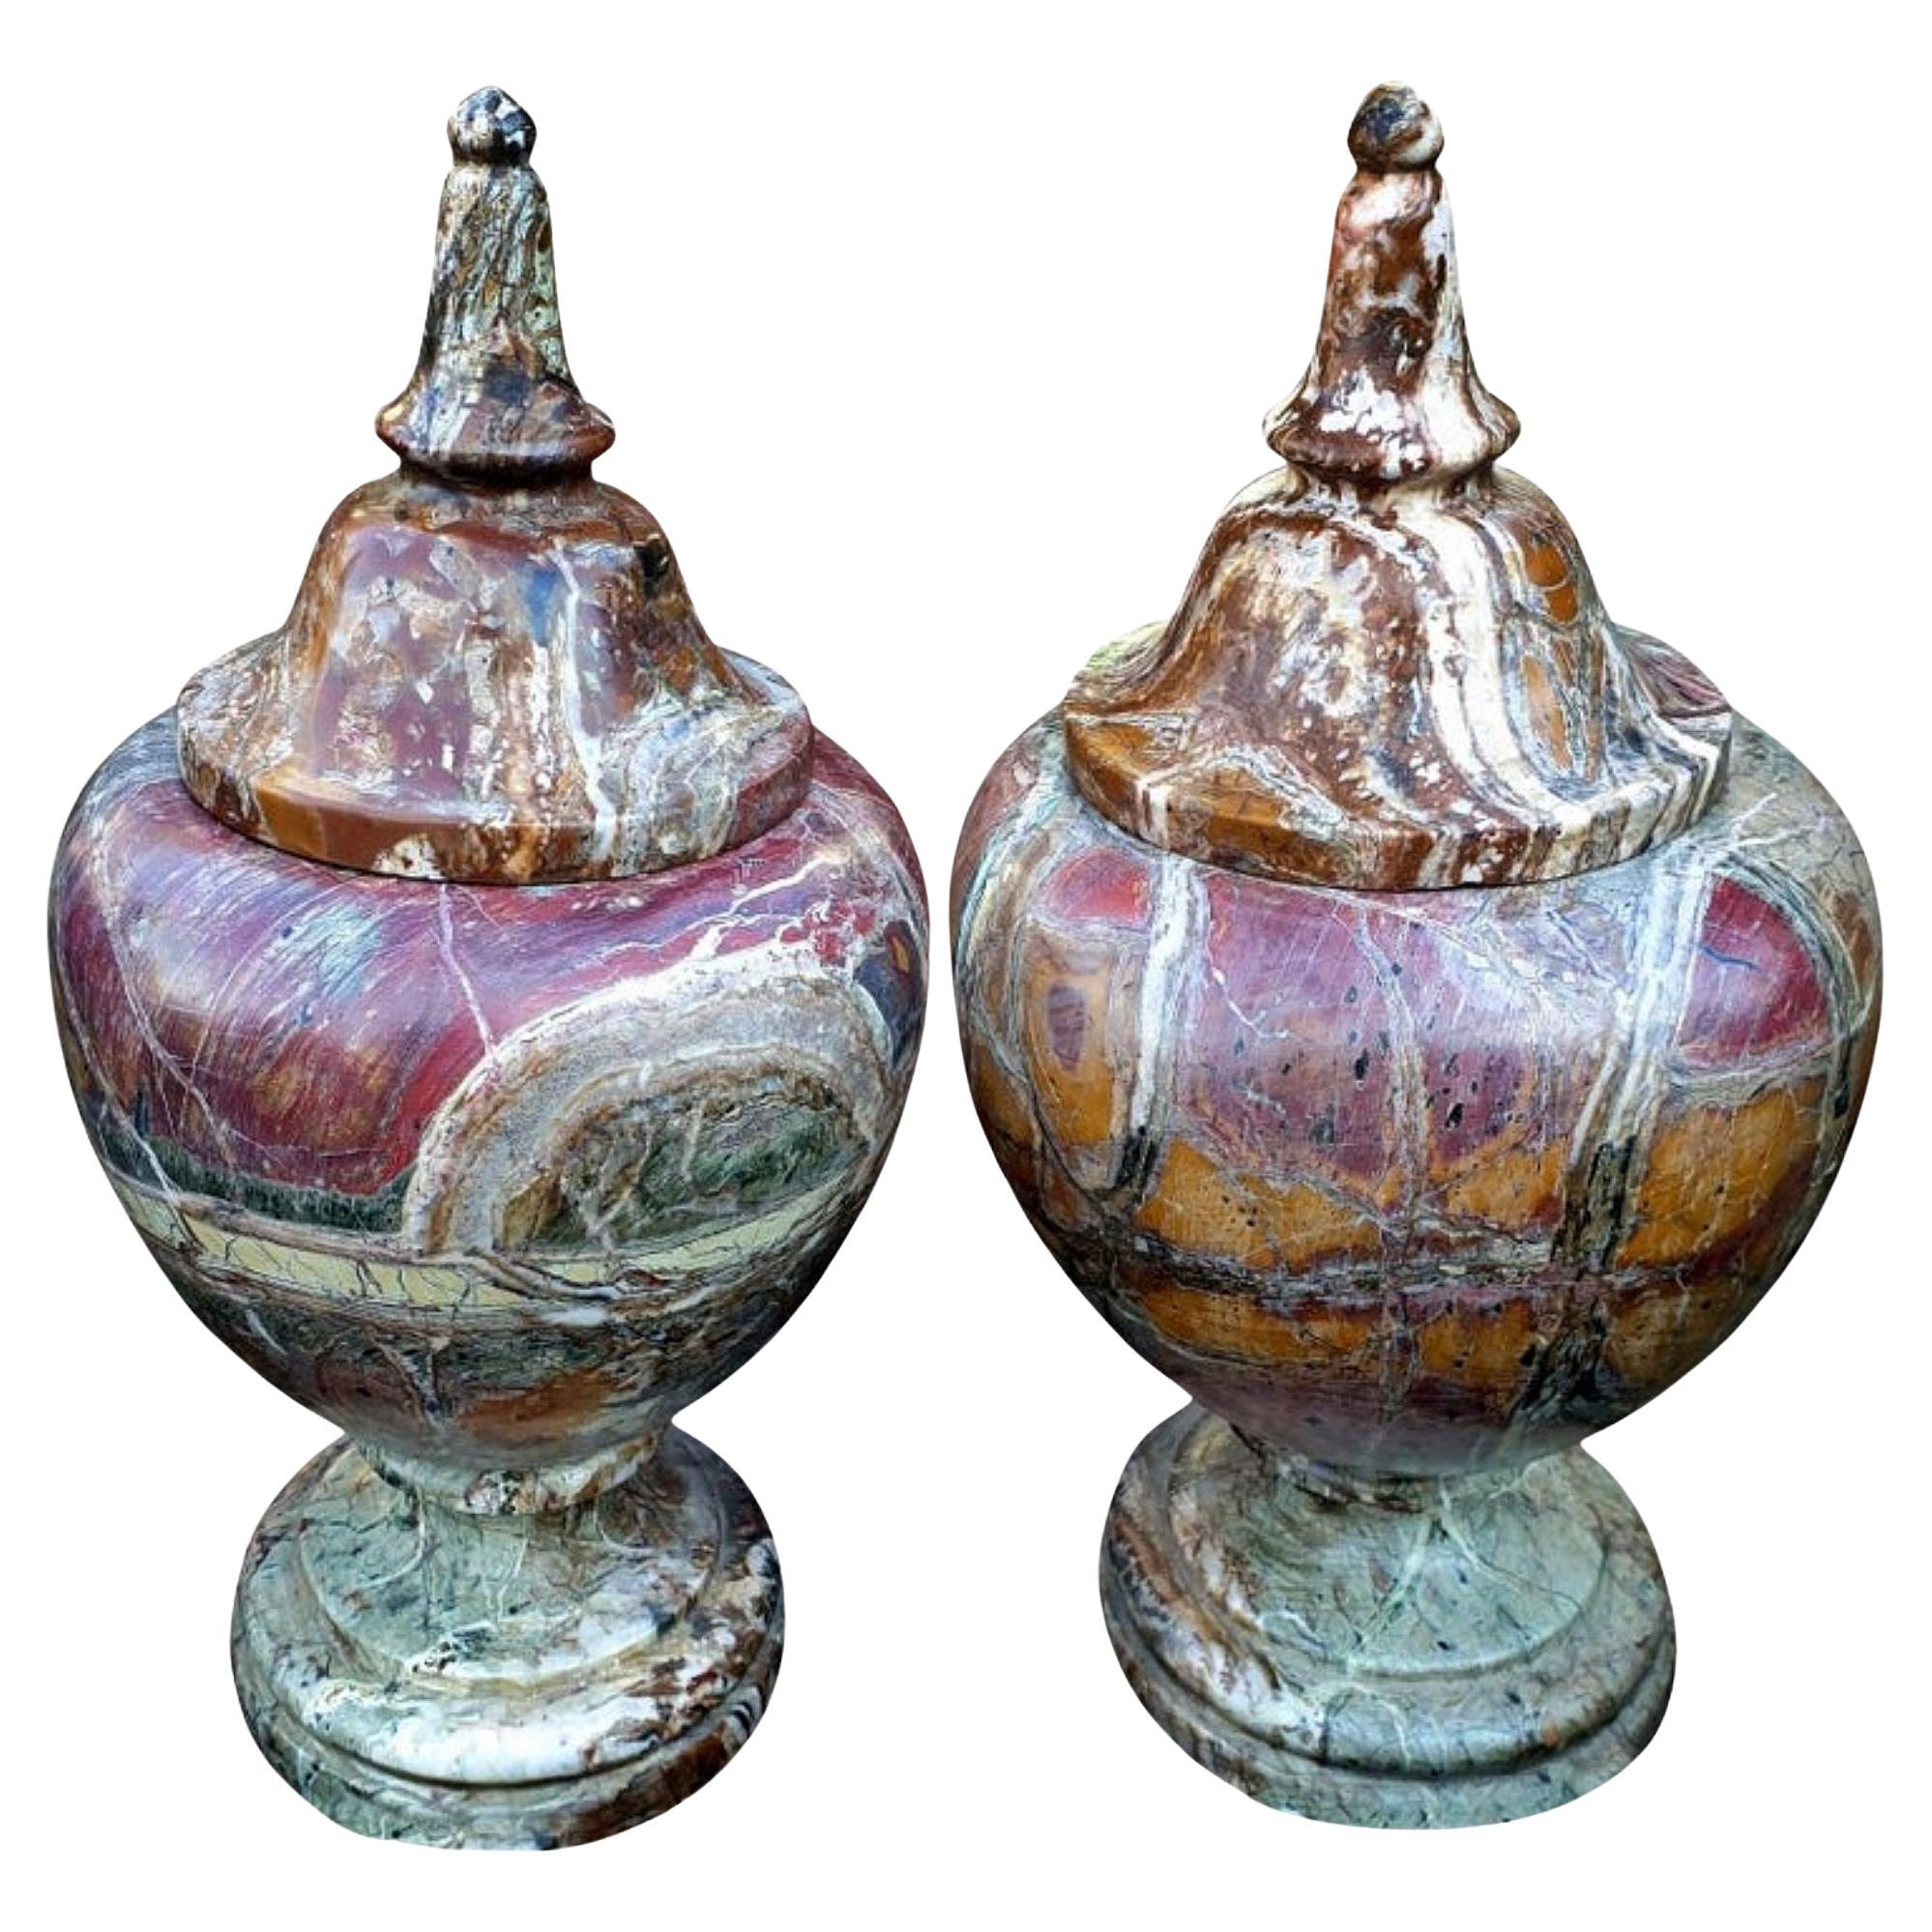 Amazing Pair of Turned Vases in Italian Diaspro Rosso Marble, Early 20th Century For Sale